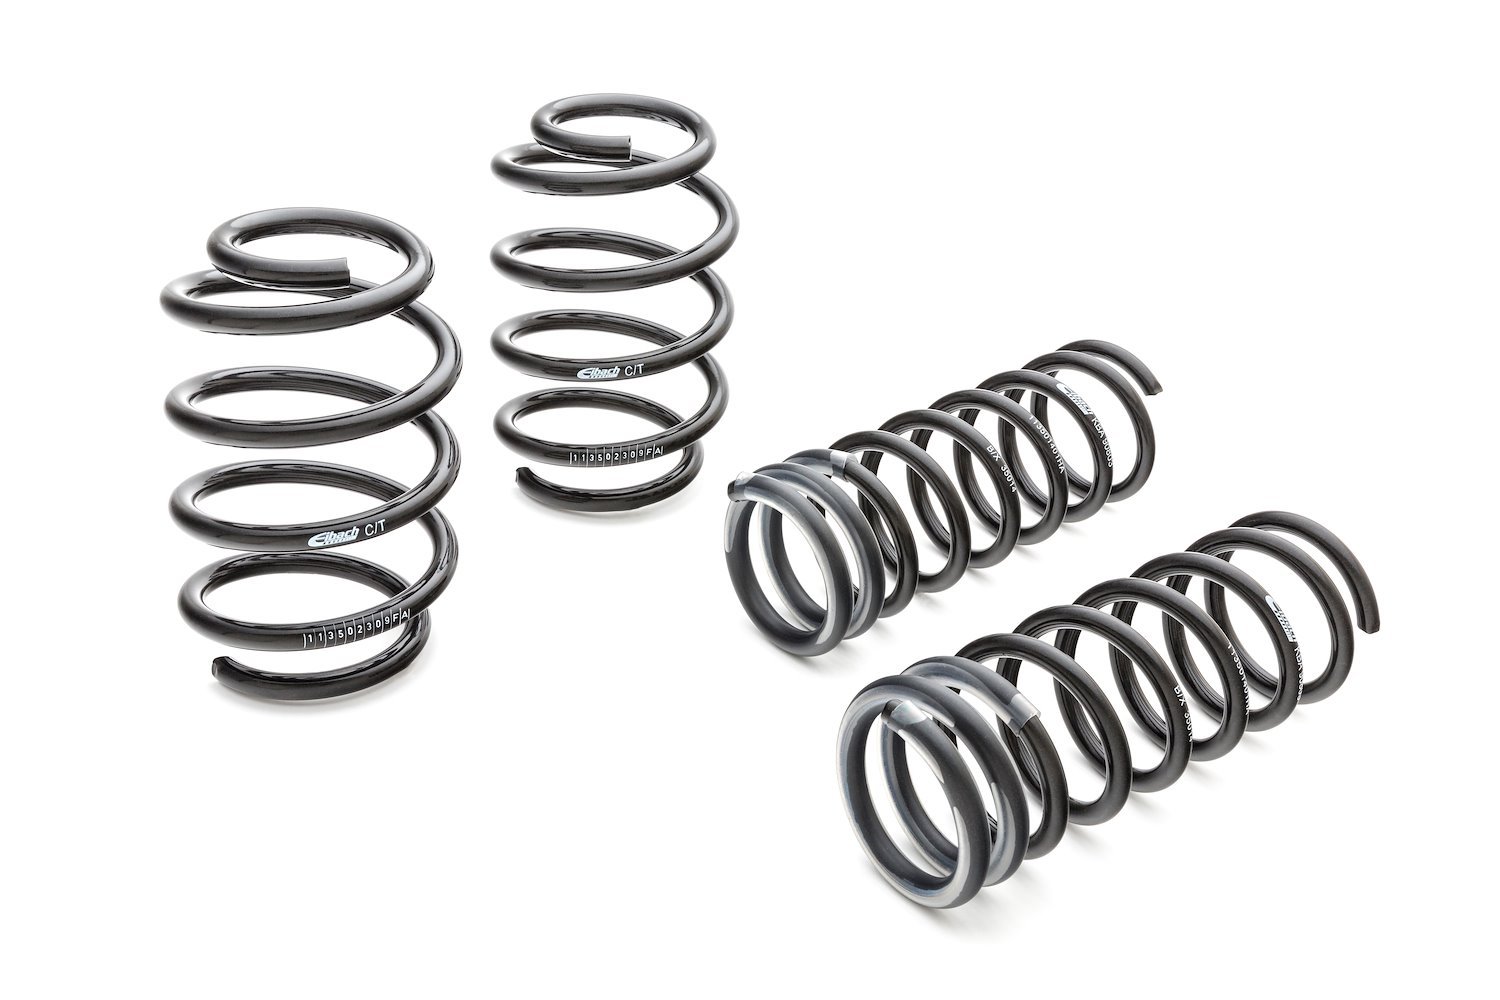 2053.140 Pro-Kit Lowering Springs 1997-2003 BMW 525i/528i/530i - 1.300 in. Front/1 in. Rear Drop